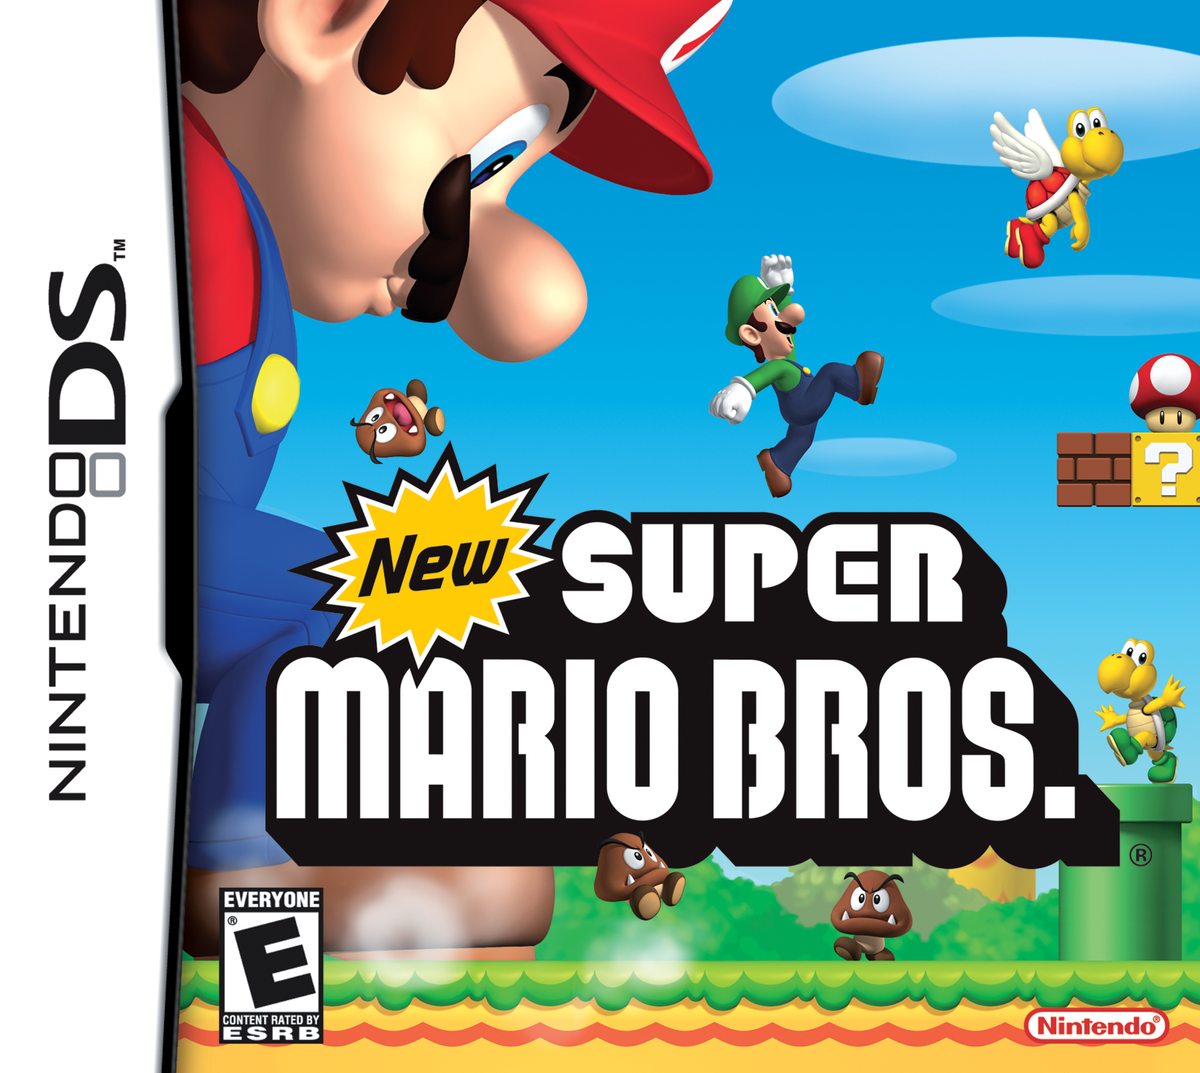 new-super-mario-bros-strategywiki-strategy-guide-and-game